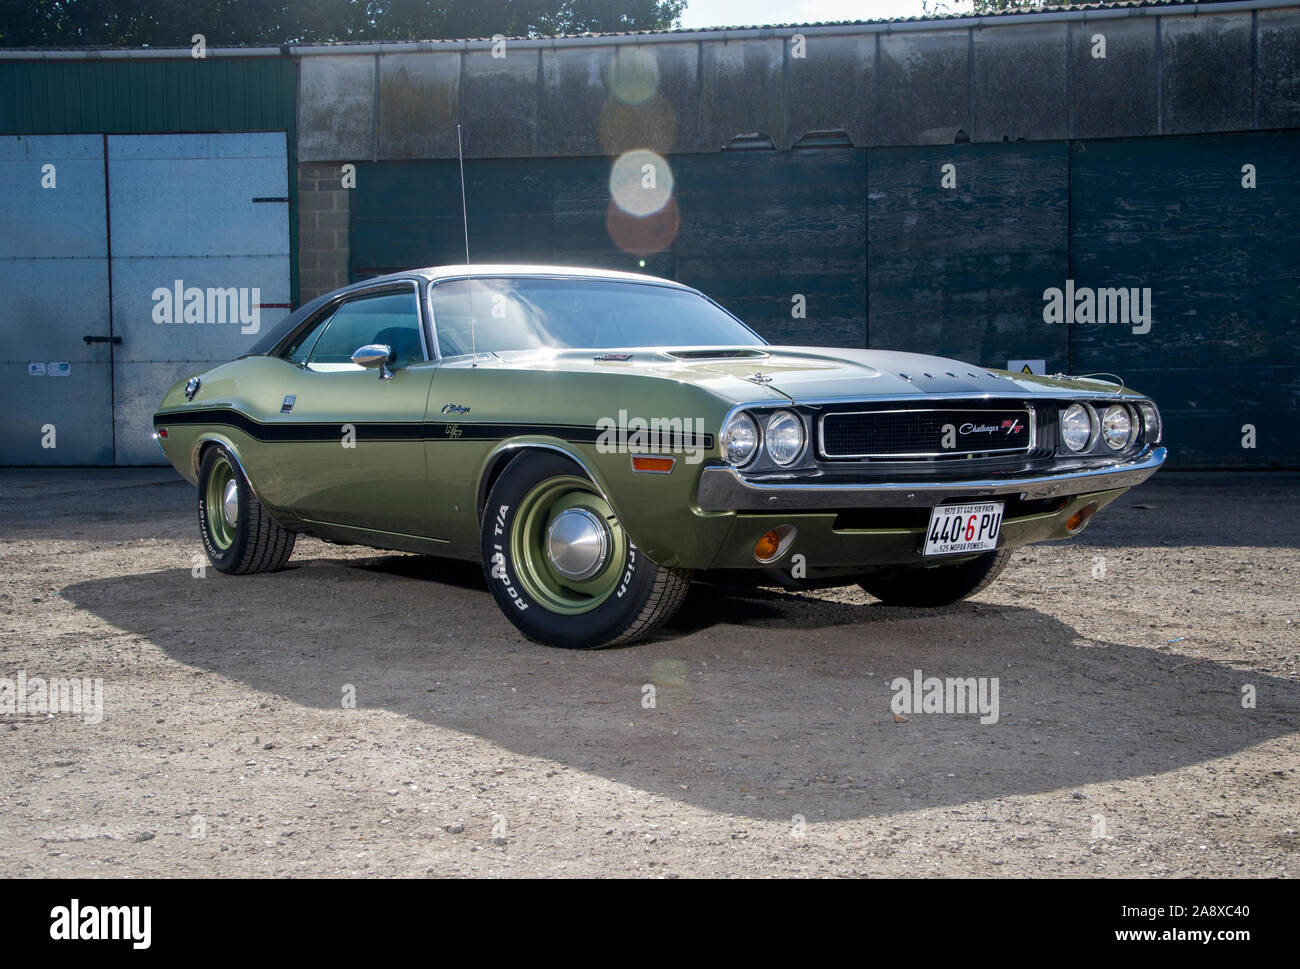 1970 Dodge Challenger 440 Six Pack classic American muscle car Stock Photo